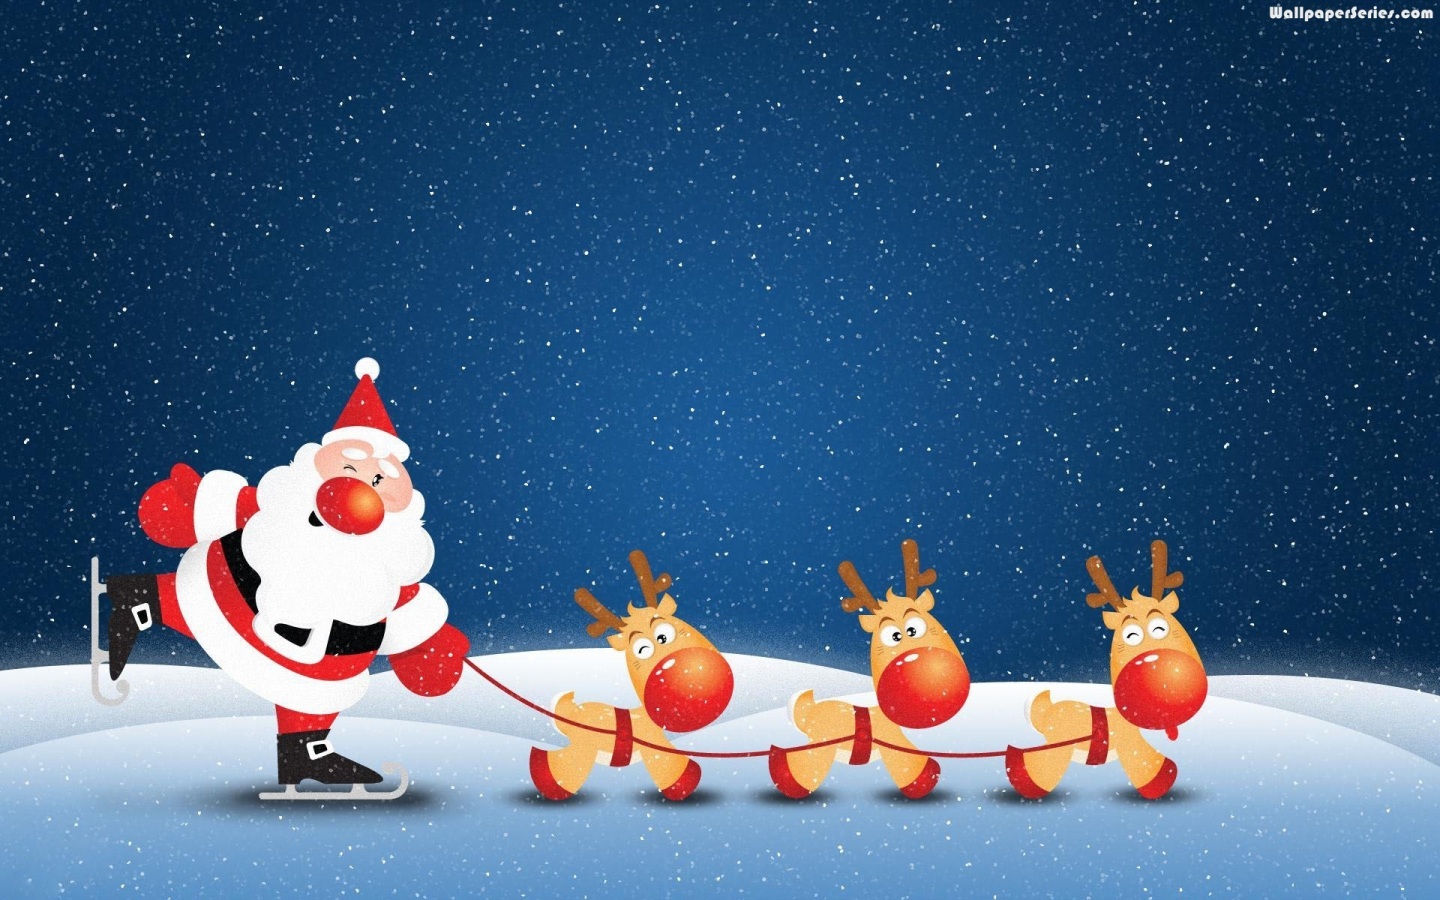 Easy Steps To Find Animated Christmas Wallpapers Free Download : Wallpapers  for Desktop with winter,